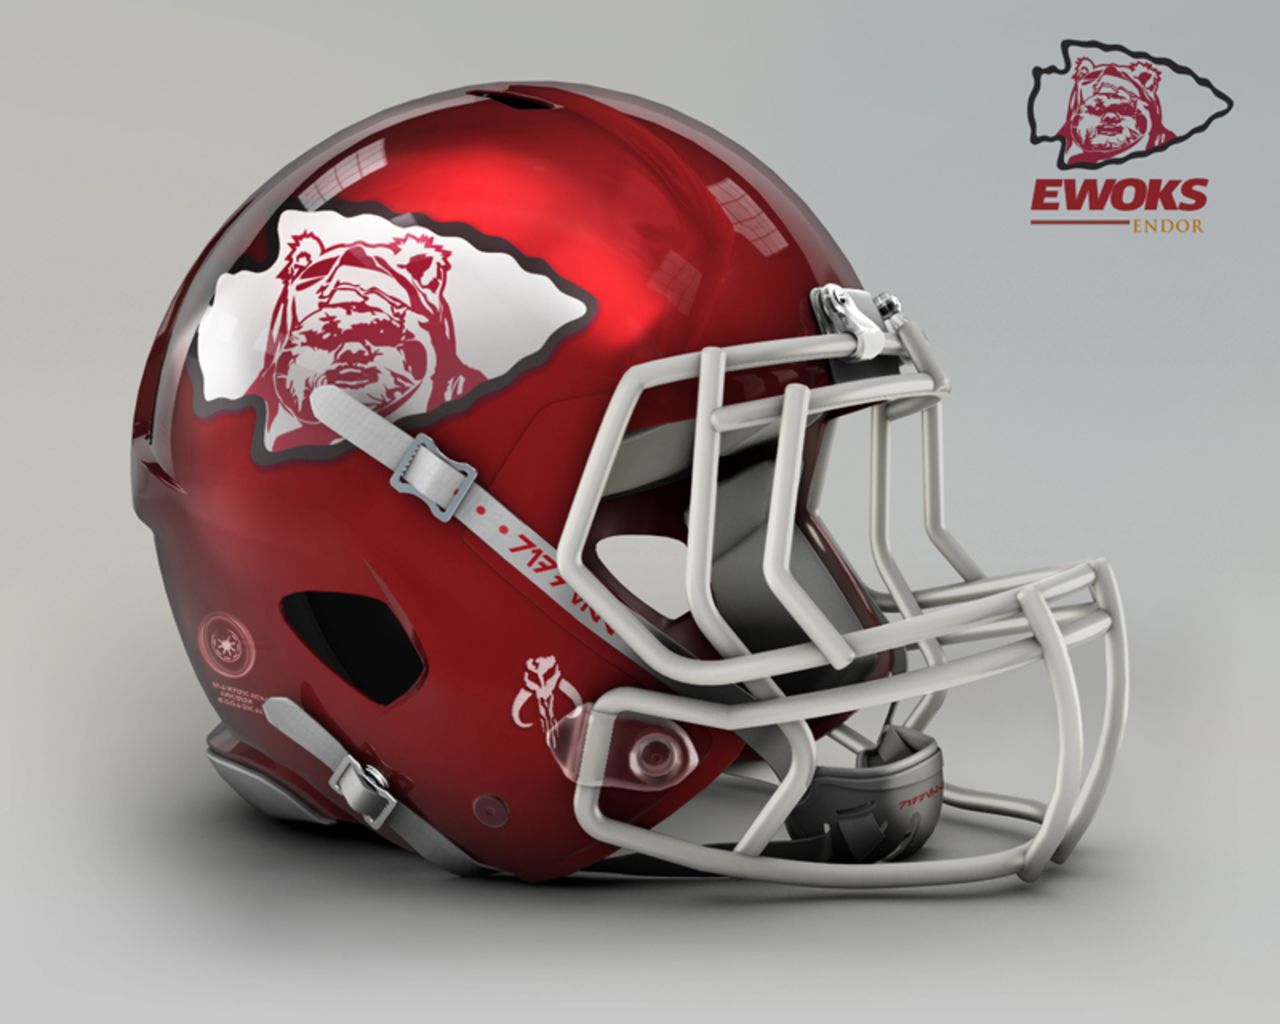 The arrowhead from the <a href="http://www.chiefs.com/" target="_blank" target="_blank">Kansas City Chiefs</a> helmet looks just like those used by the furry Ewoks to pester Stormtroopers during the epic battle of Endor, which seals the fate of the galaxy in Return of the Jedi.